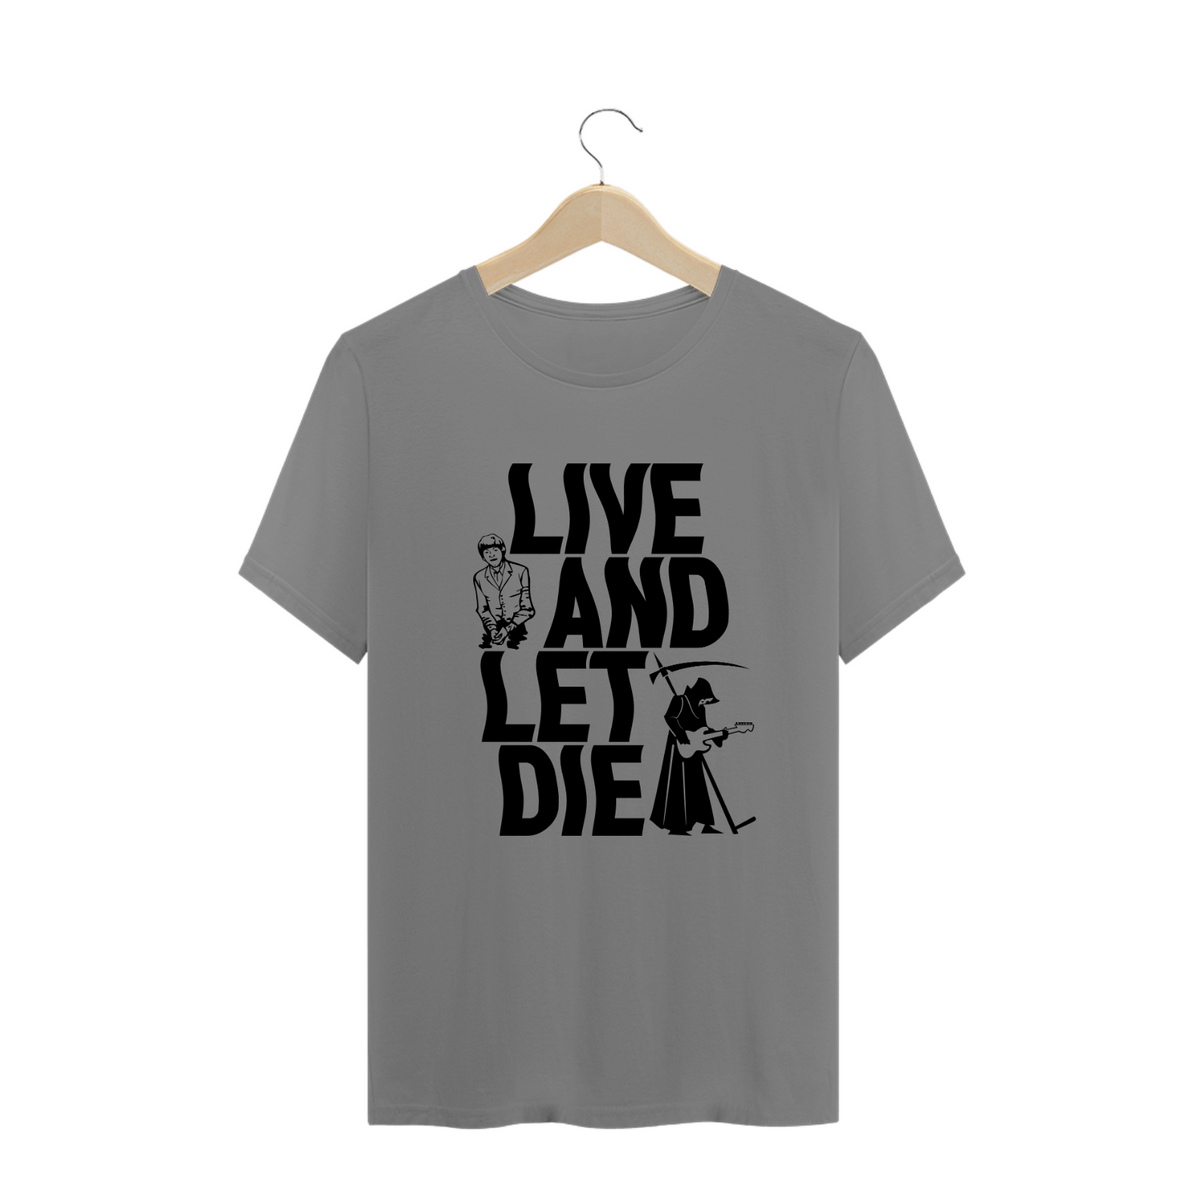 Nome do produto: LIVE AND LET DIE